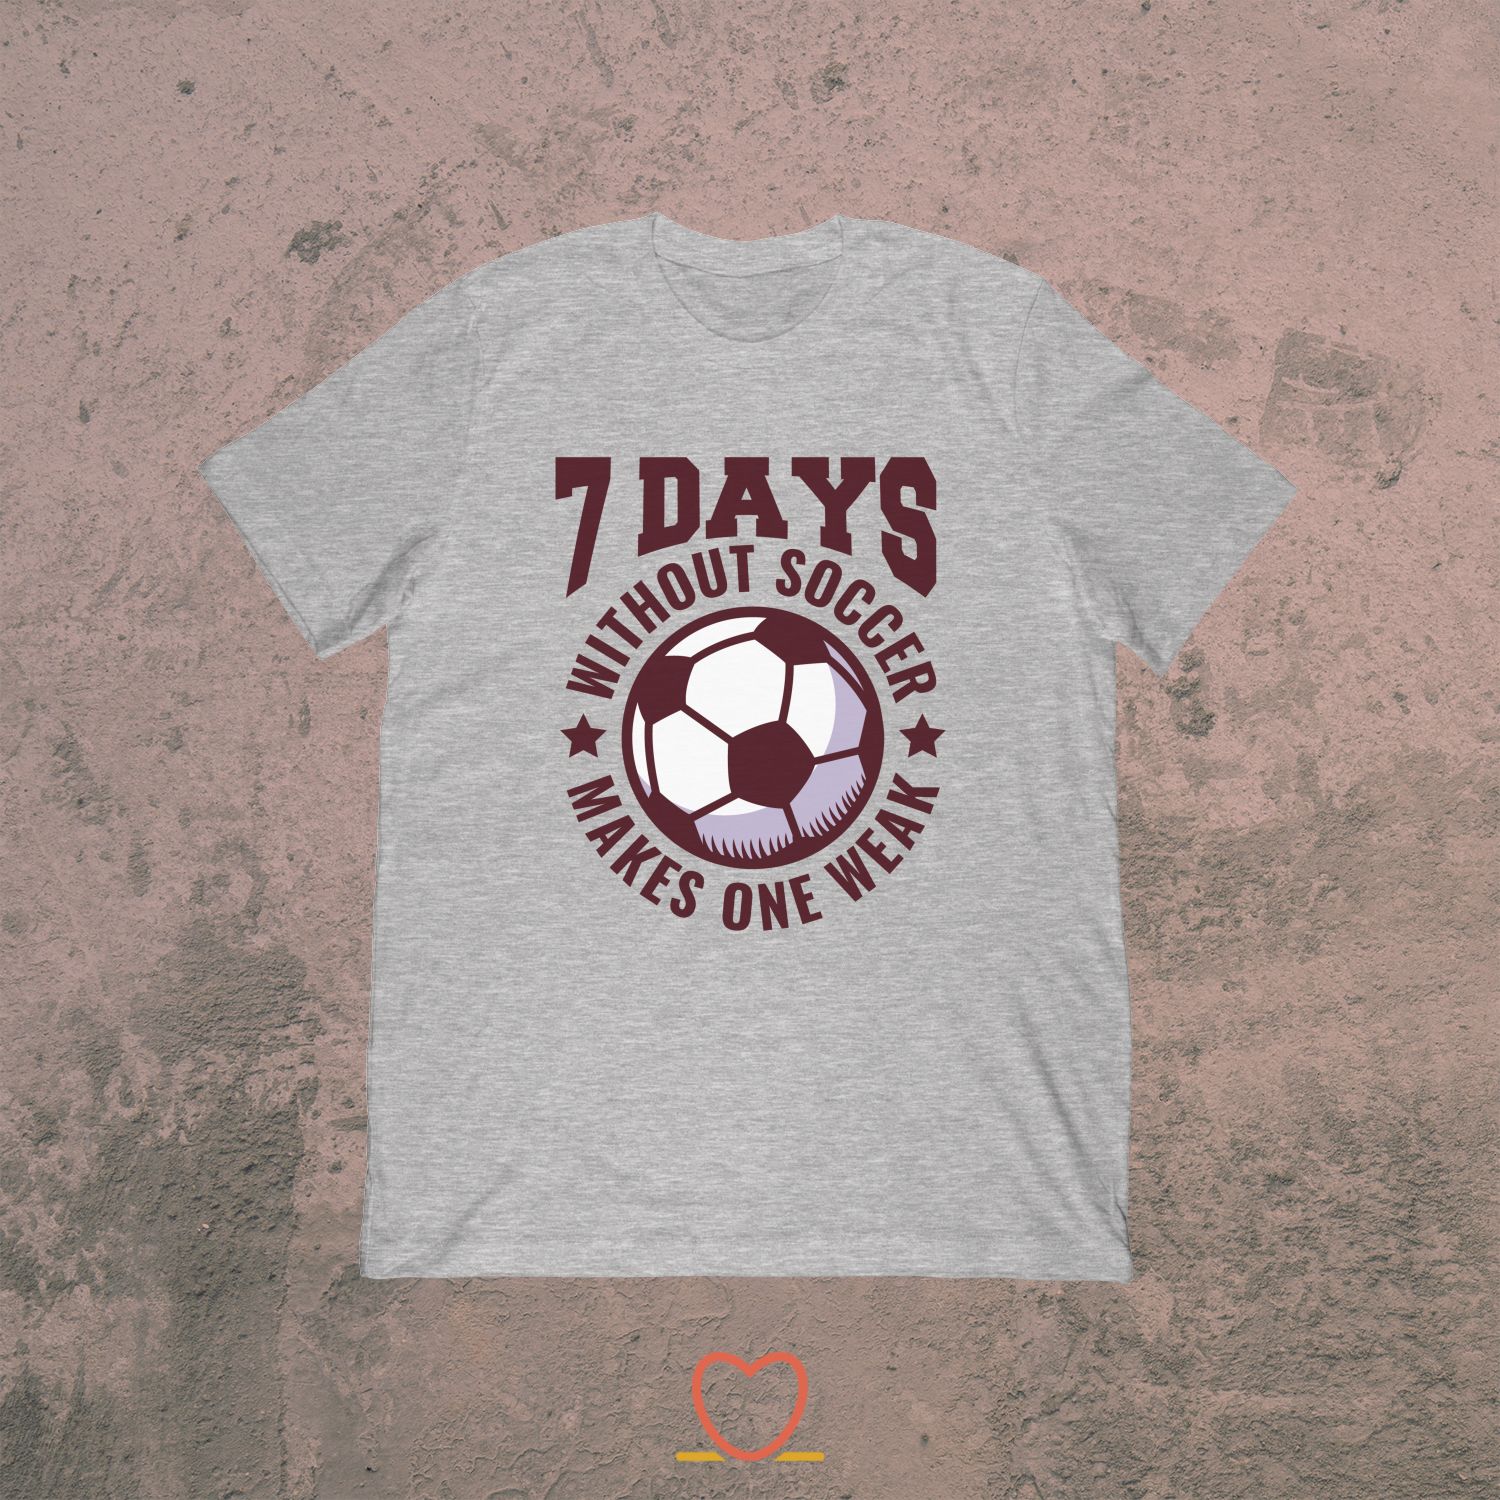 7 Days Without Soccer Makes One Weak – Soccer Player Tee